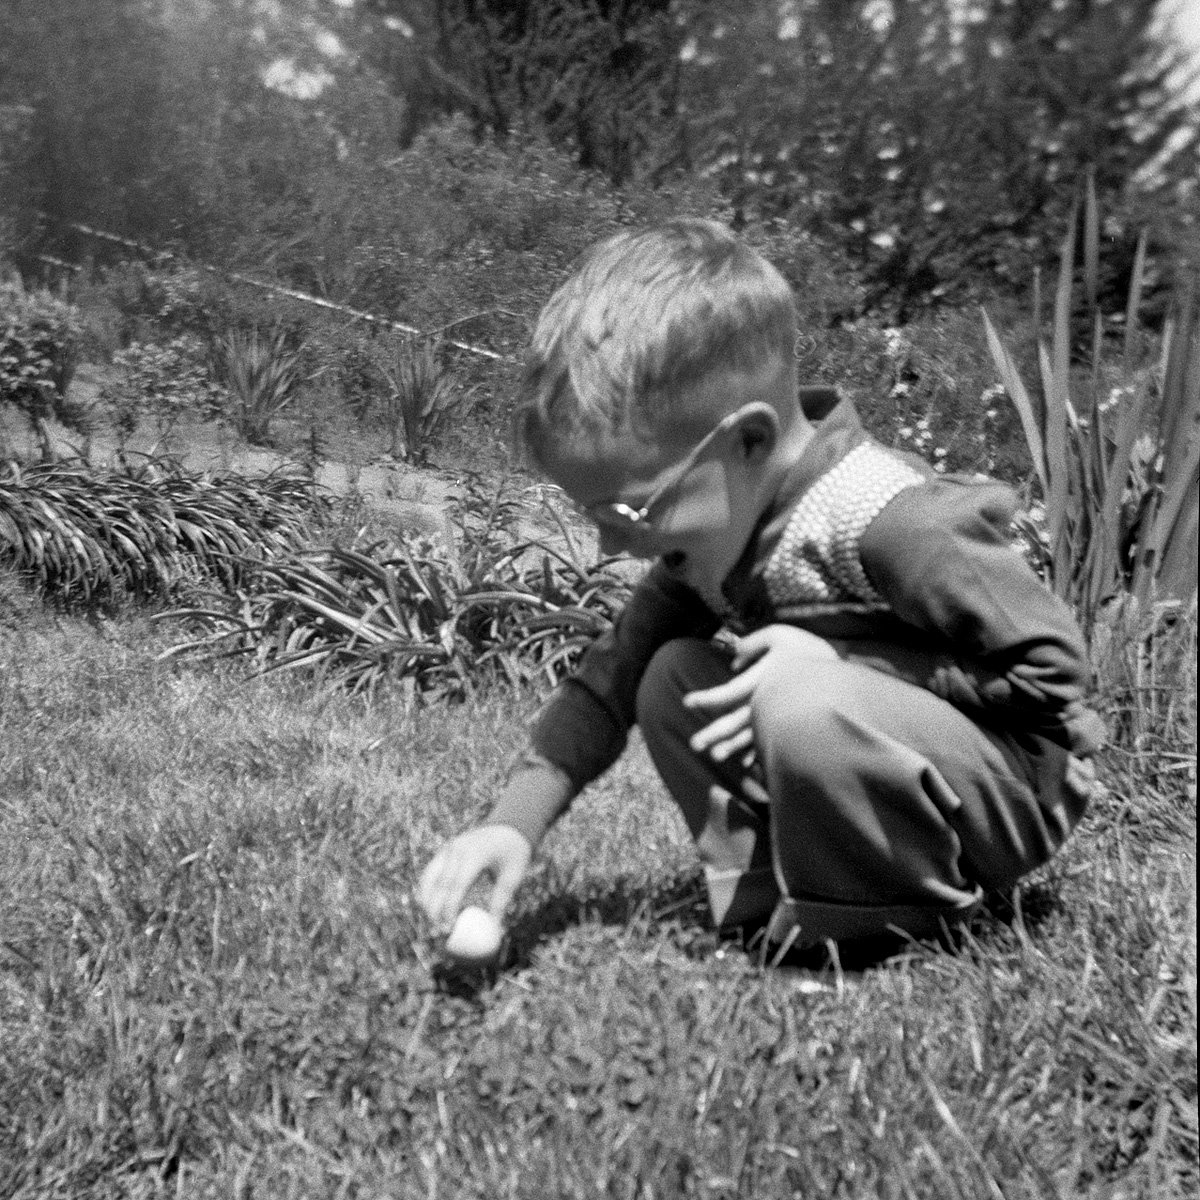 Looking at the expression on my face, I have to wonder if anything else ever made me quite as happy as finding that Easter egg 59 years ago. Of course, I was easier to please back then. View full size.